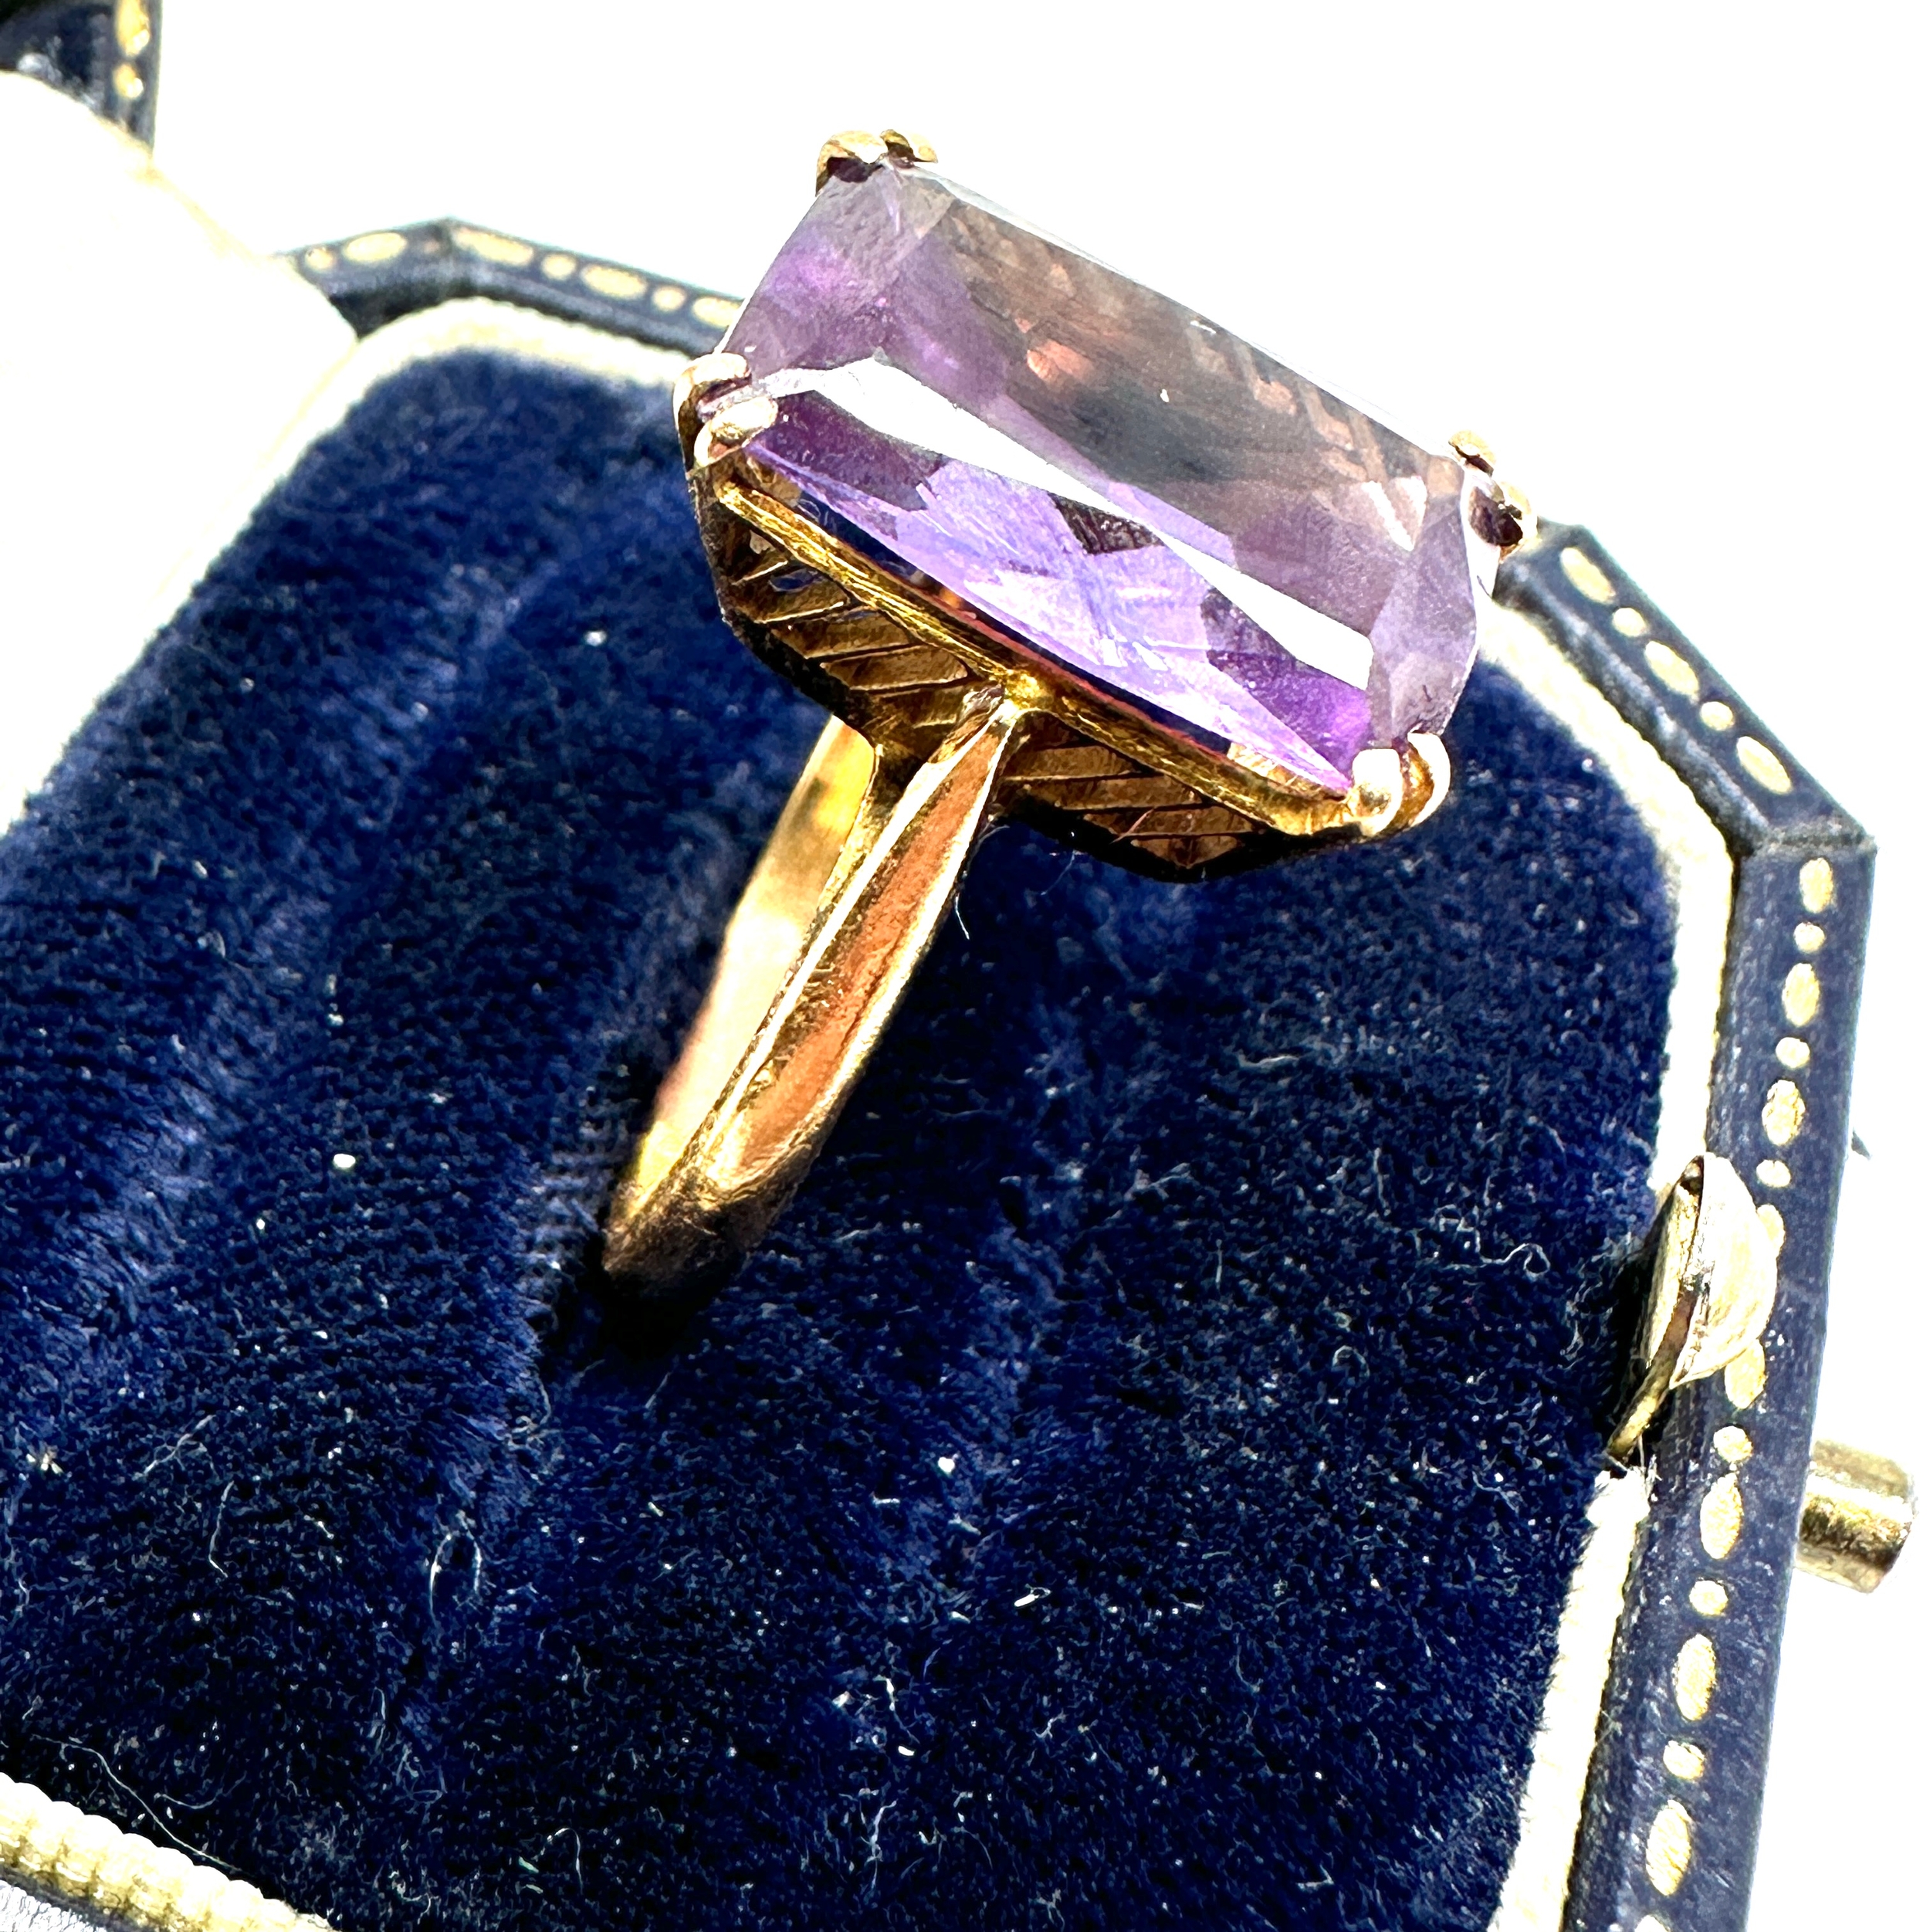 18ct gold amethyst ring weight 5g xrt tested as 18ct gold - Image 2 of 4